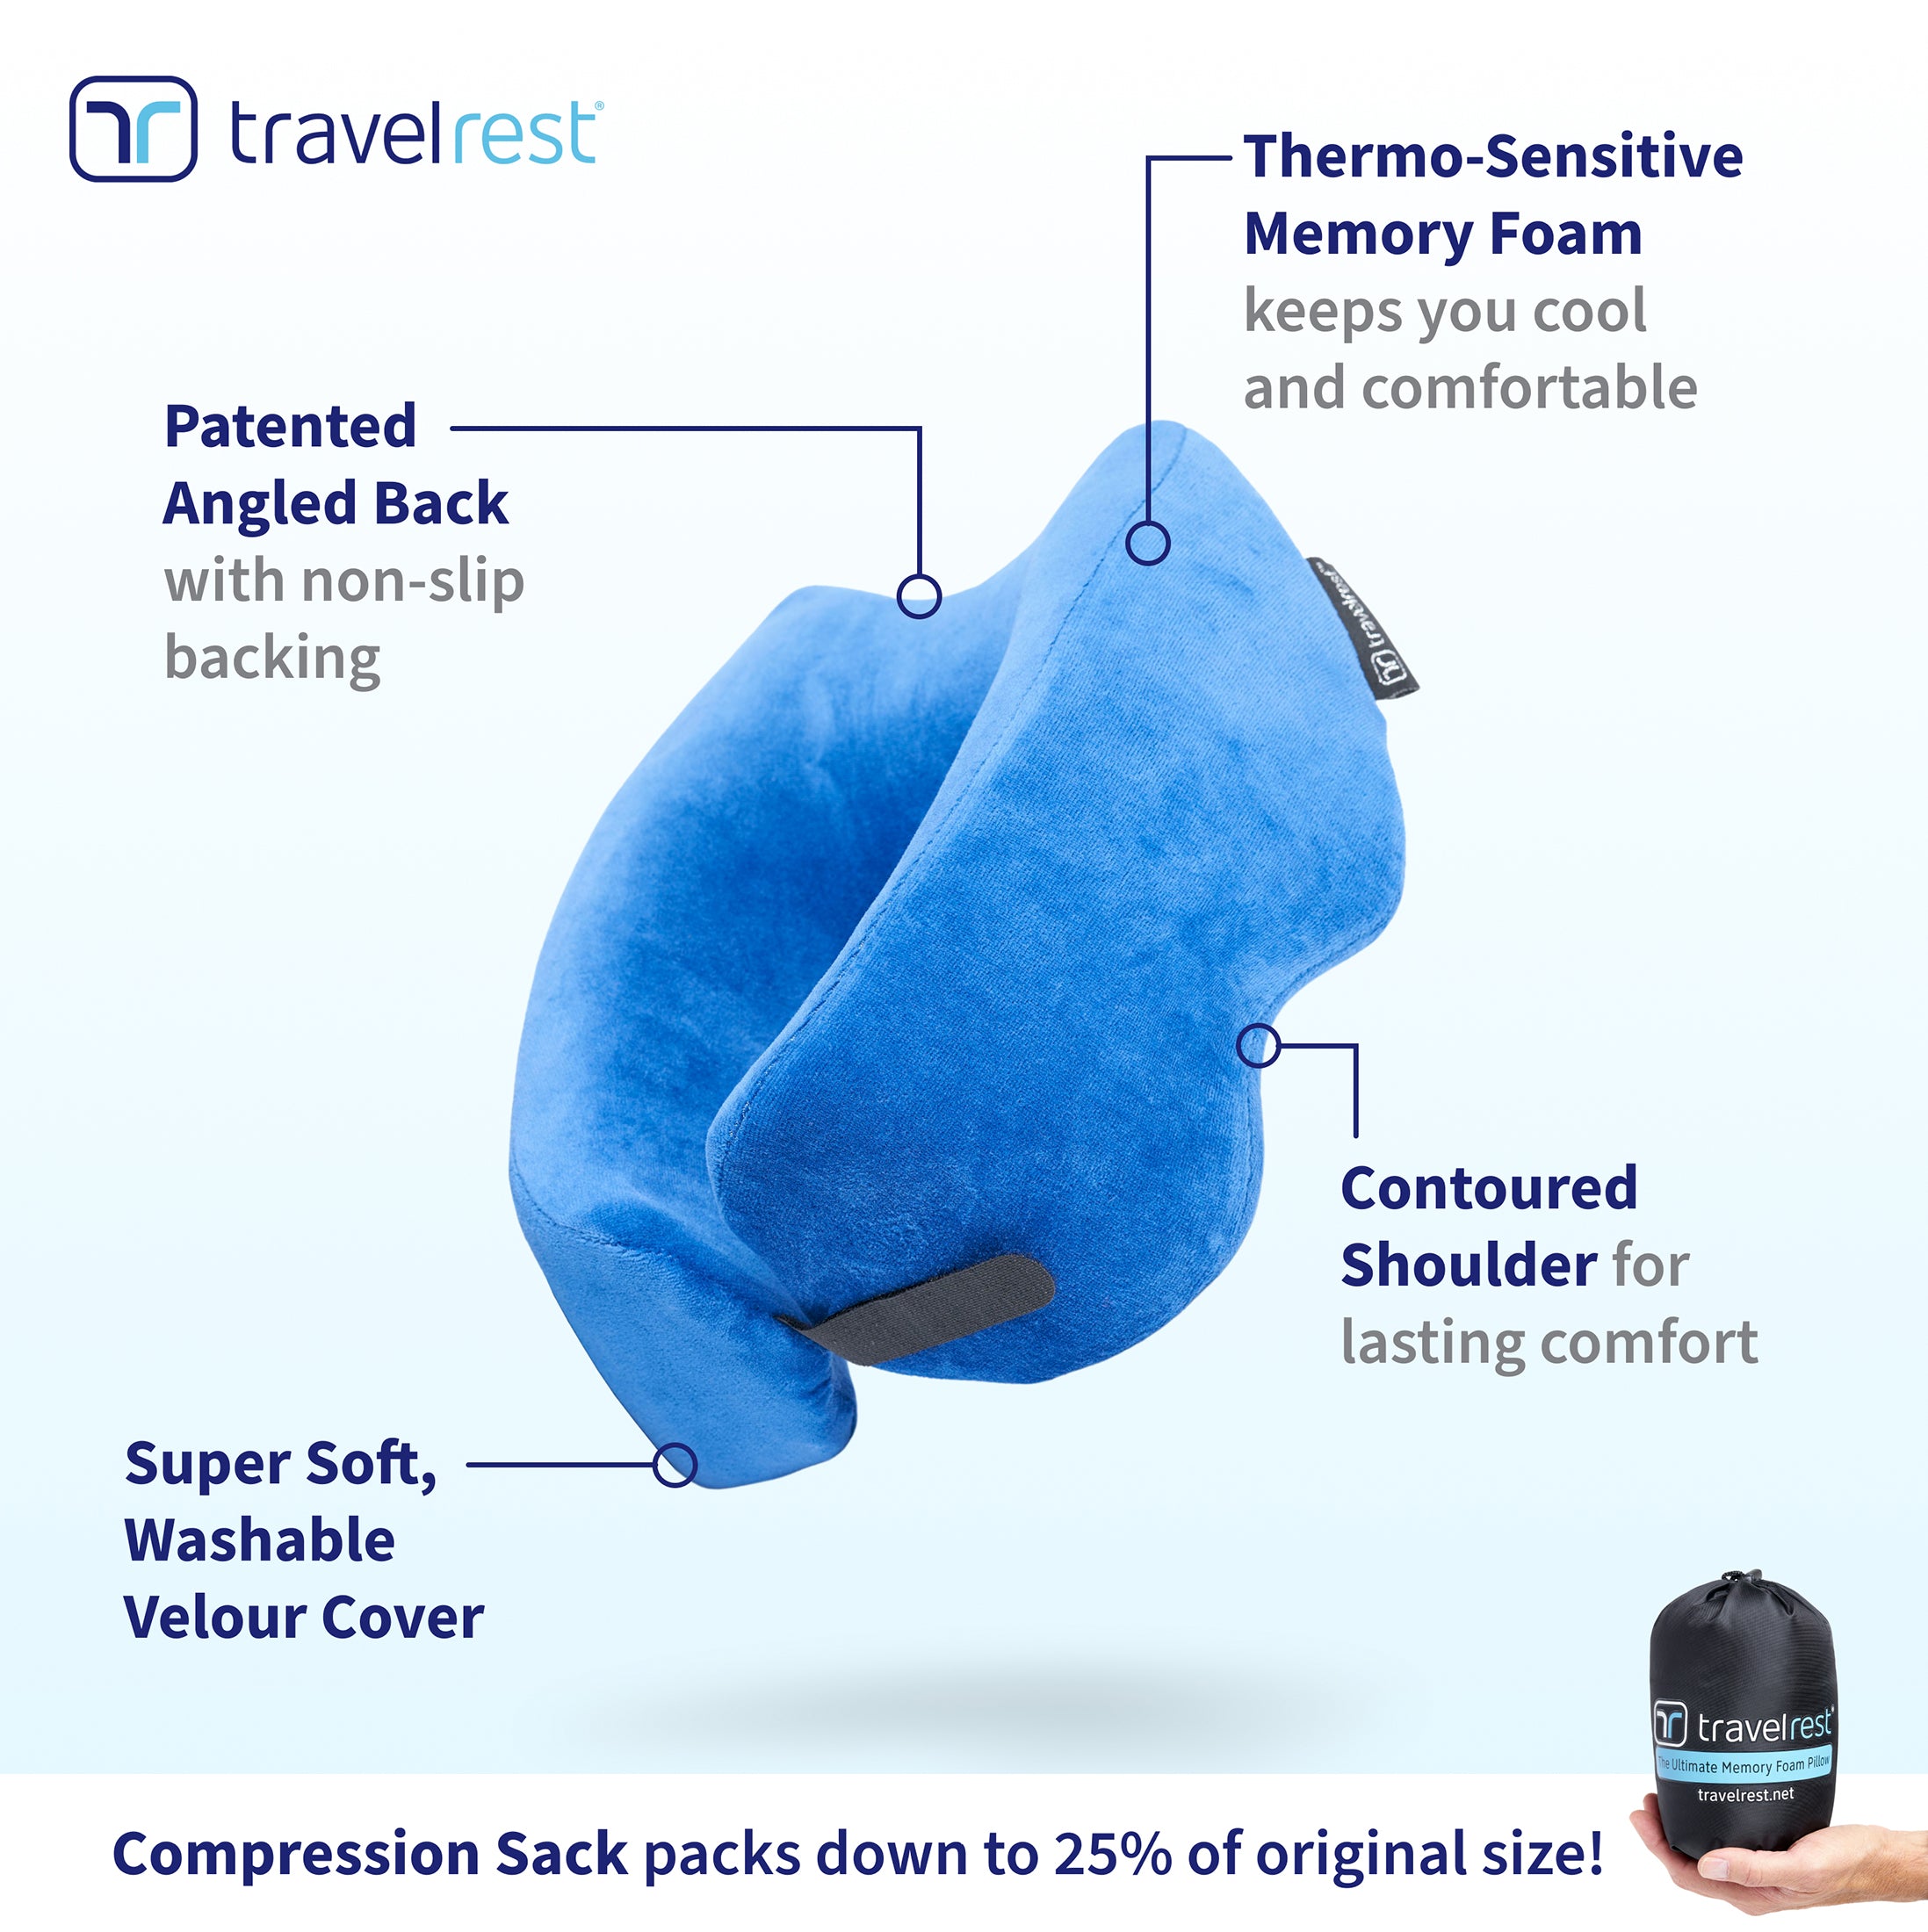 Travelrest Nest Patented Ultimate Memory Foam Travel Pillow/Neck Pillow Voted Best Travel Pillow for 2022 by Wirecutter - image 3 of 11